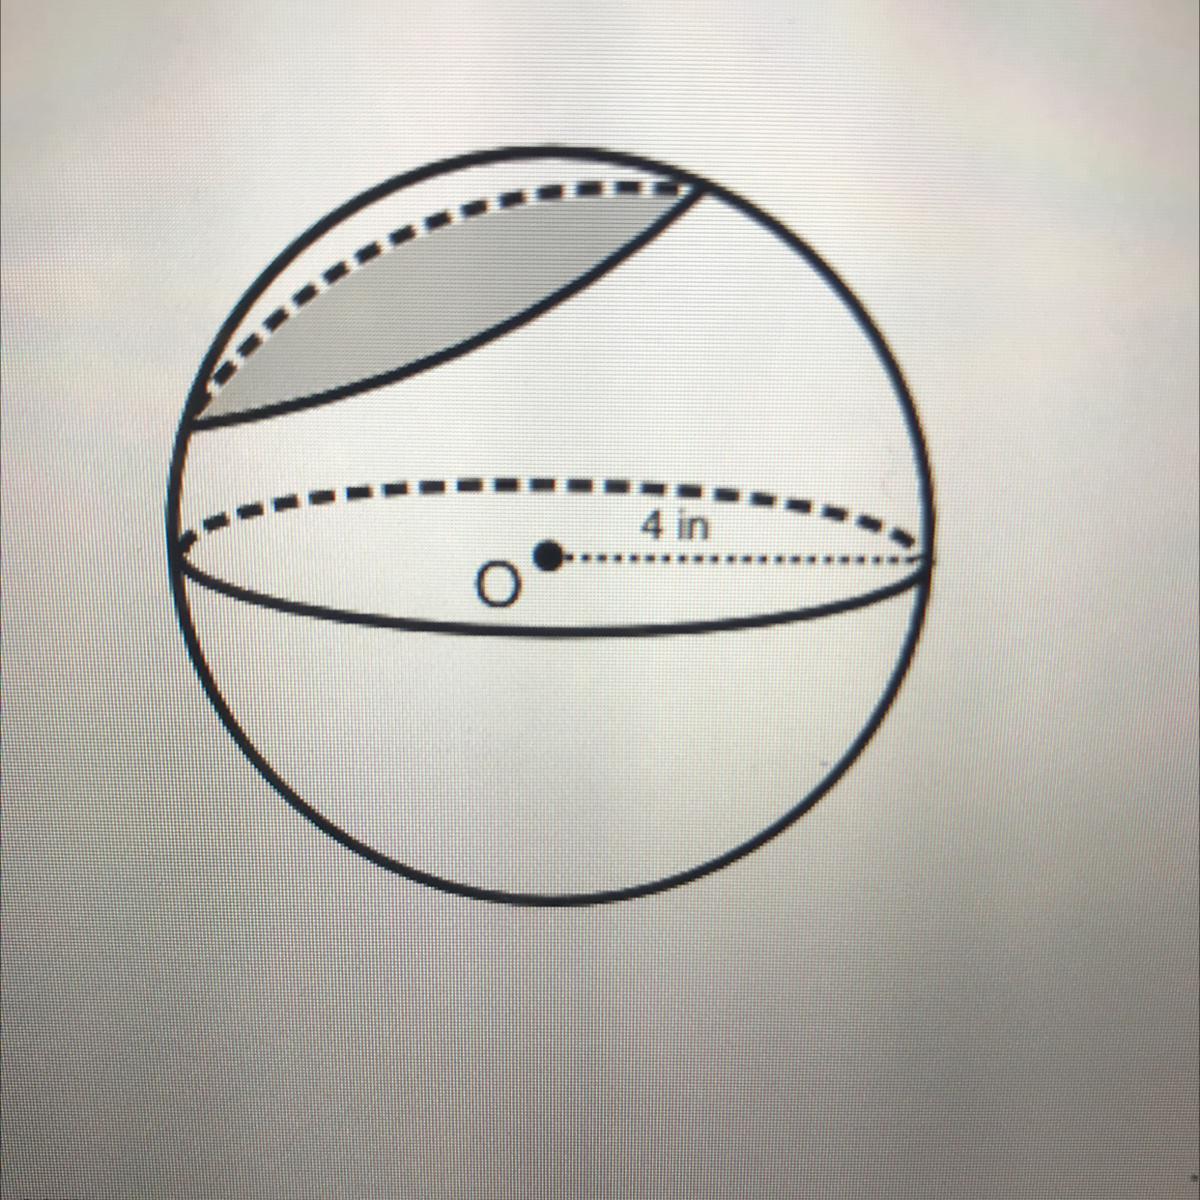 The Diagram Shows A Sphere With Center O And A Radius Of 4 Inches That Has Been Cut By A Plane. The Cross-sectionformed